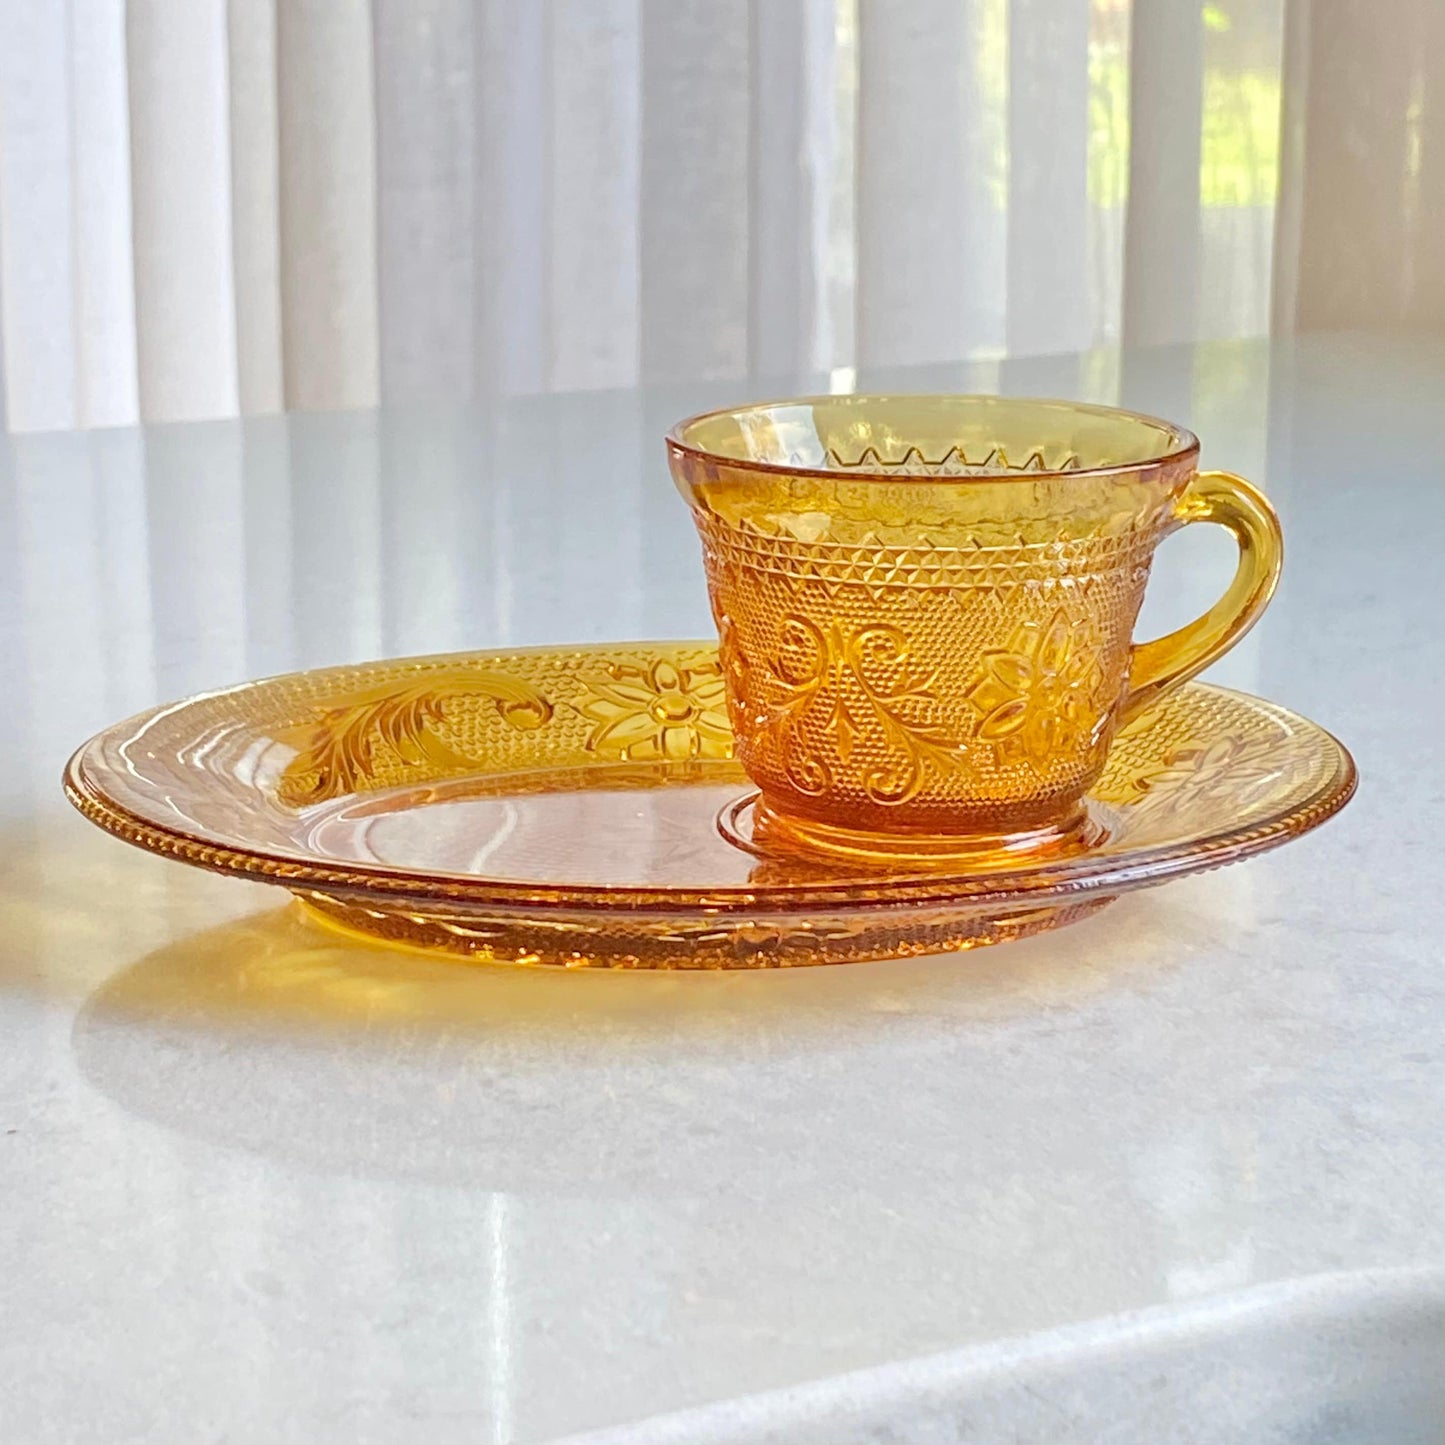 Vintage Tiara Glass Amber Chantilly Snack Sets (circa 1971 - 1989) - 8 pieces total, 4 plates and 4 cups